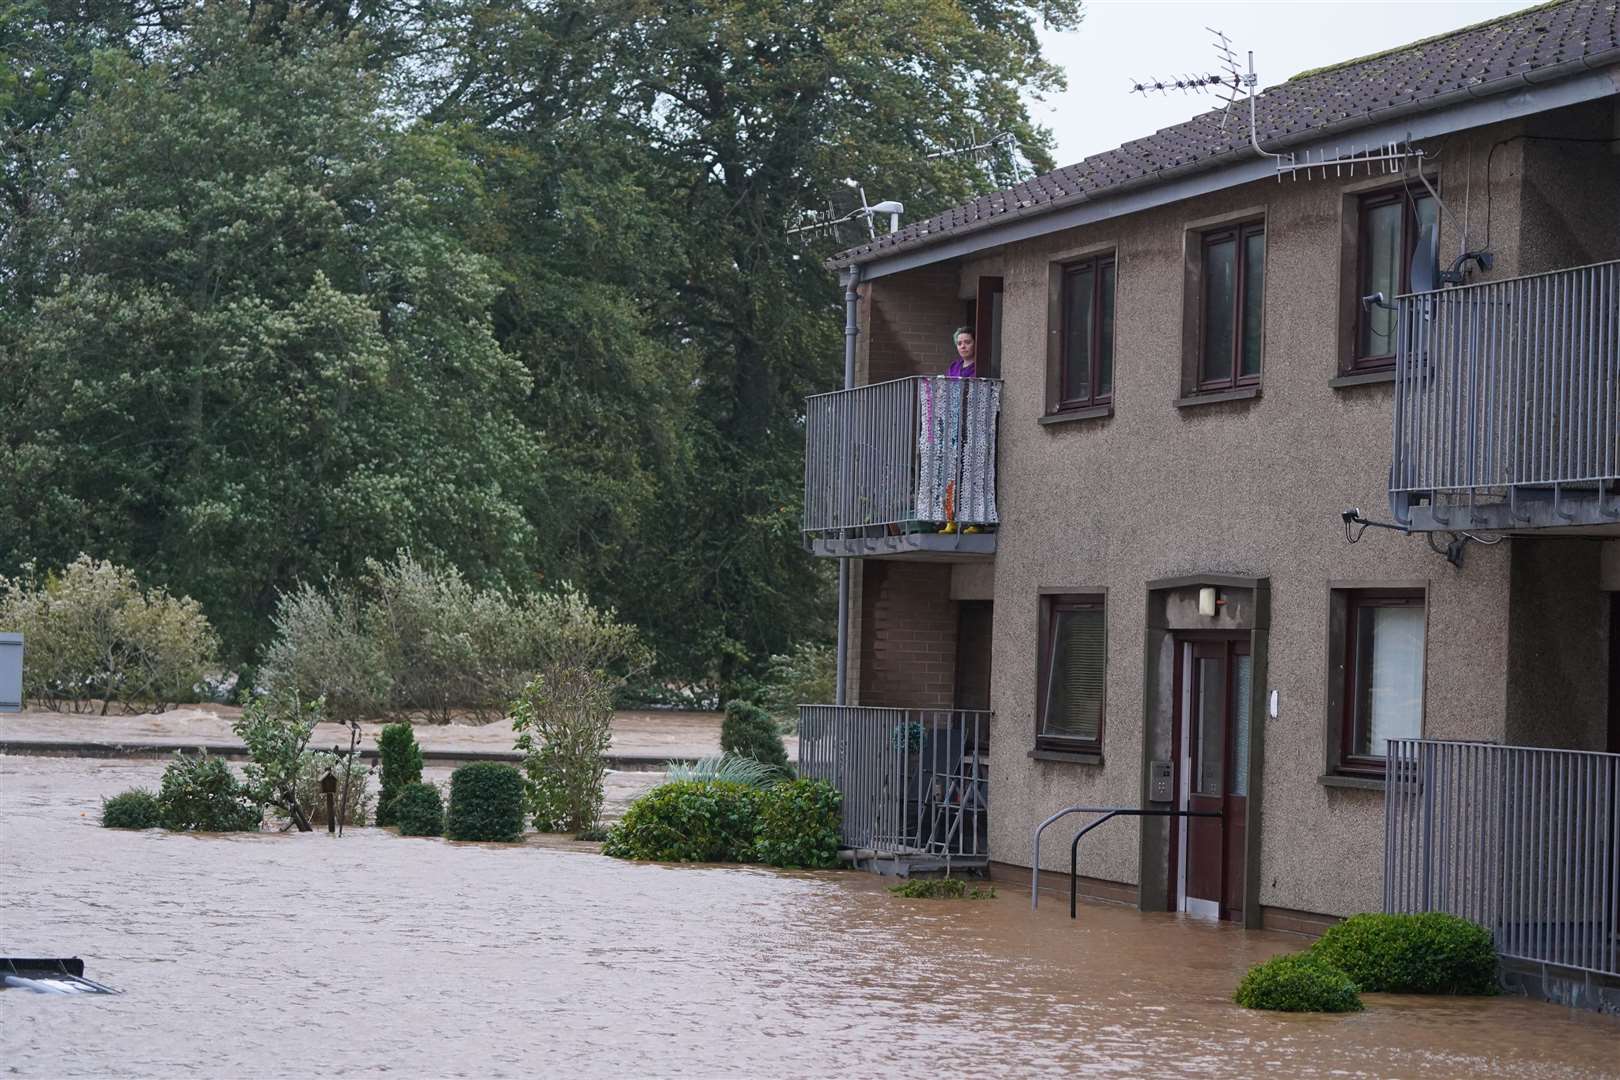 Flood defences in the town failed as a result of Storm Babet (Andrew Milligan/PA)